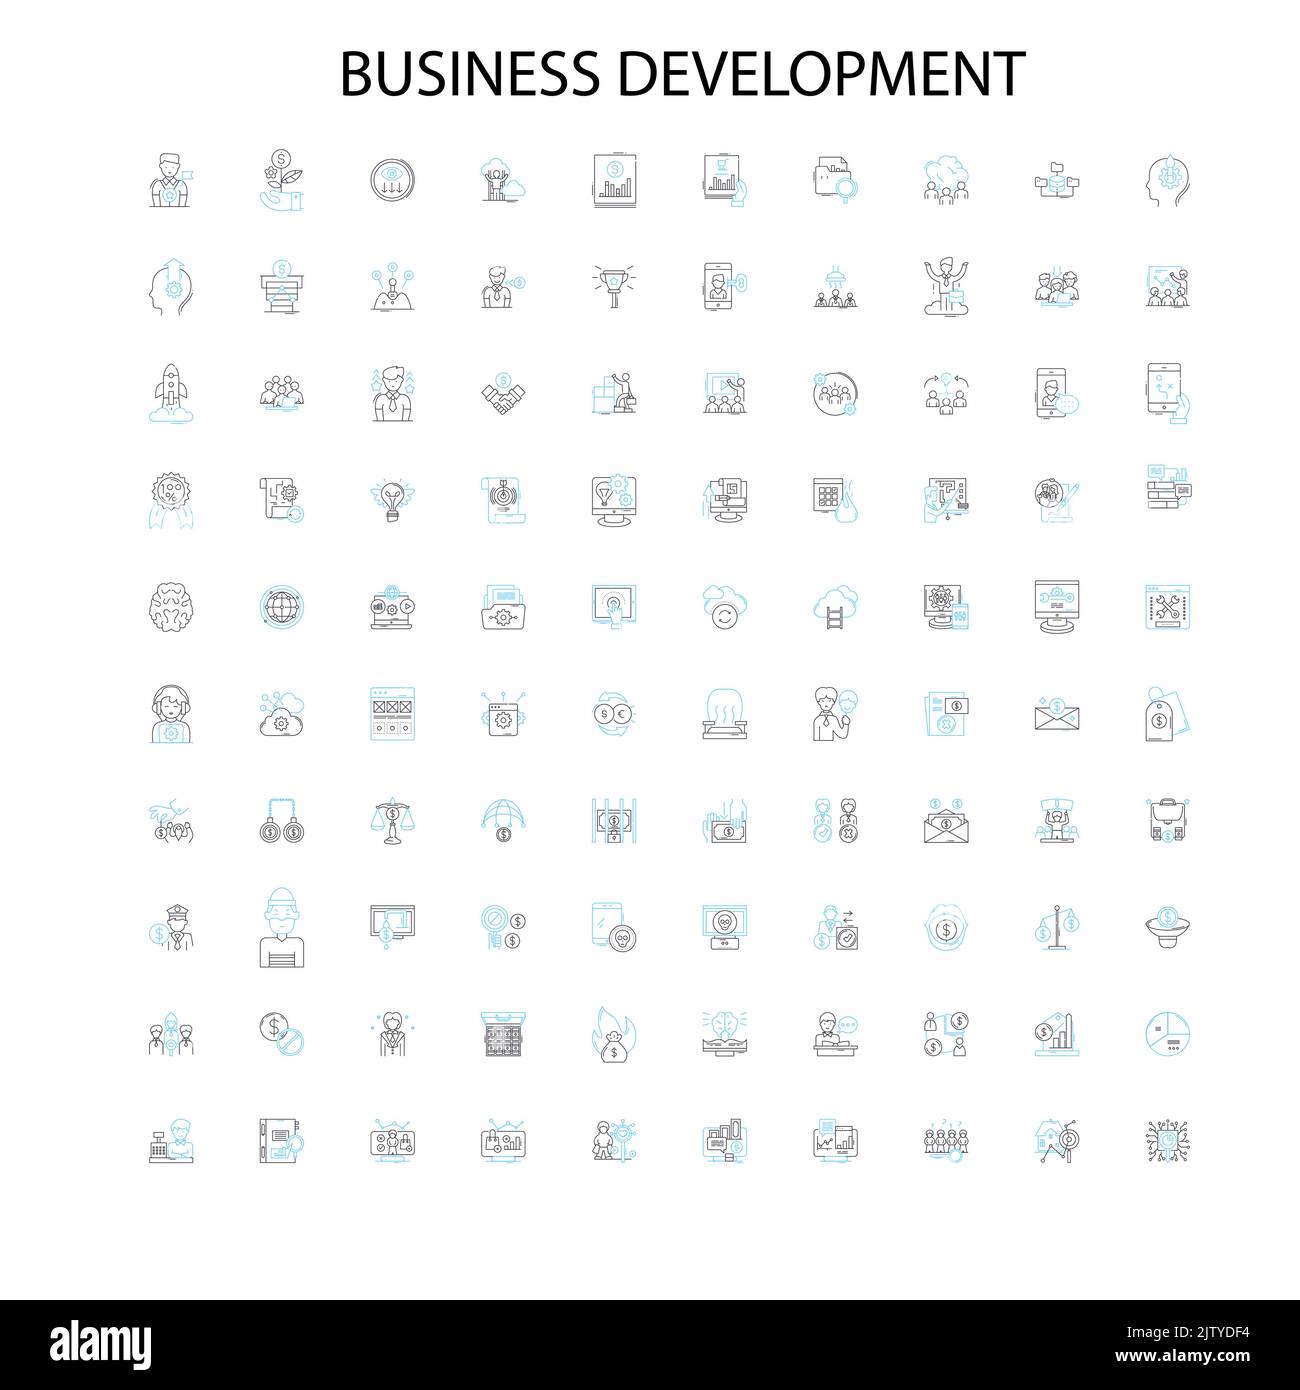 business development icons, signs, outline symbols, concept linear illustration line collection Stock Vector